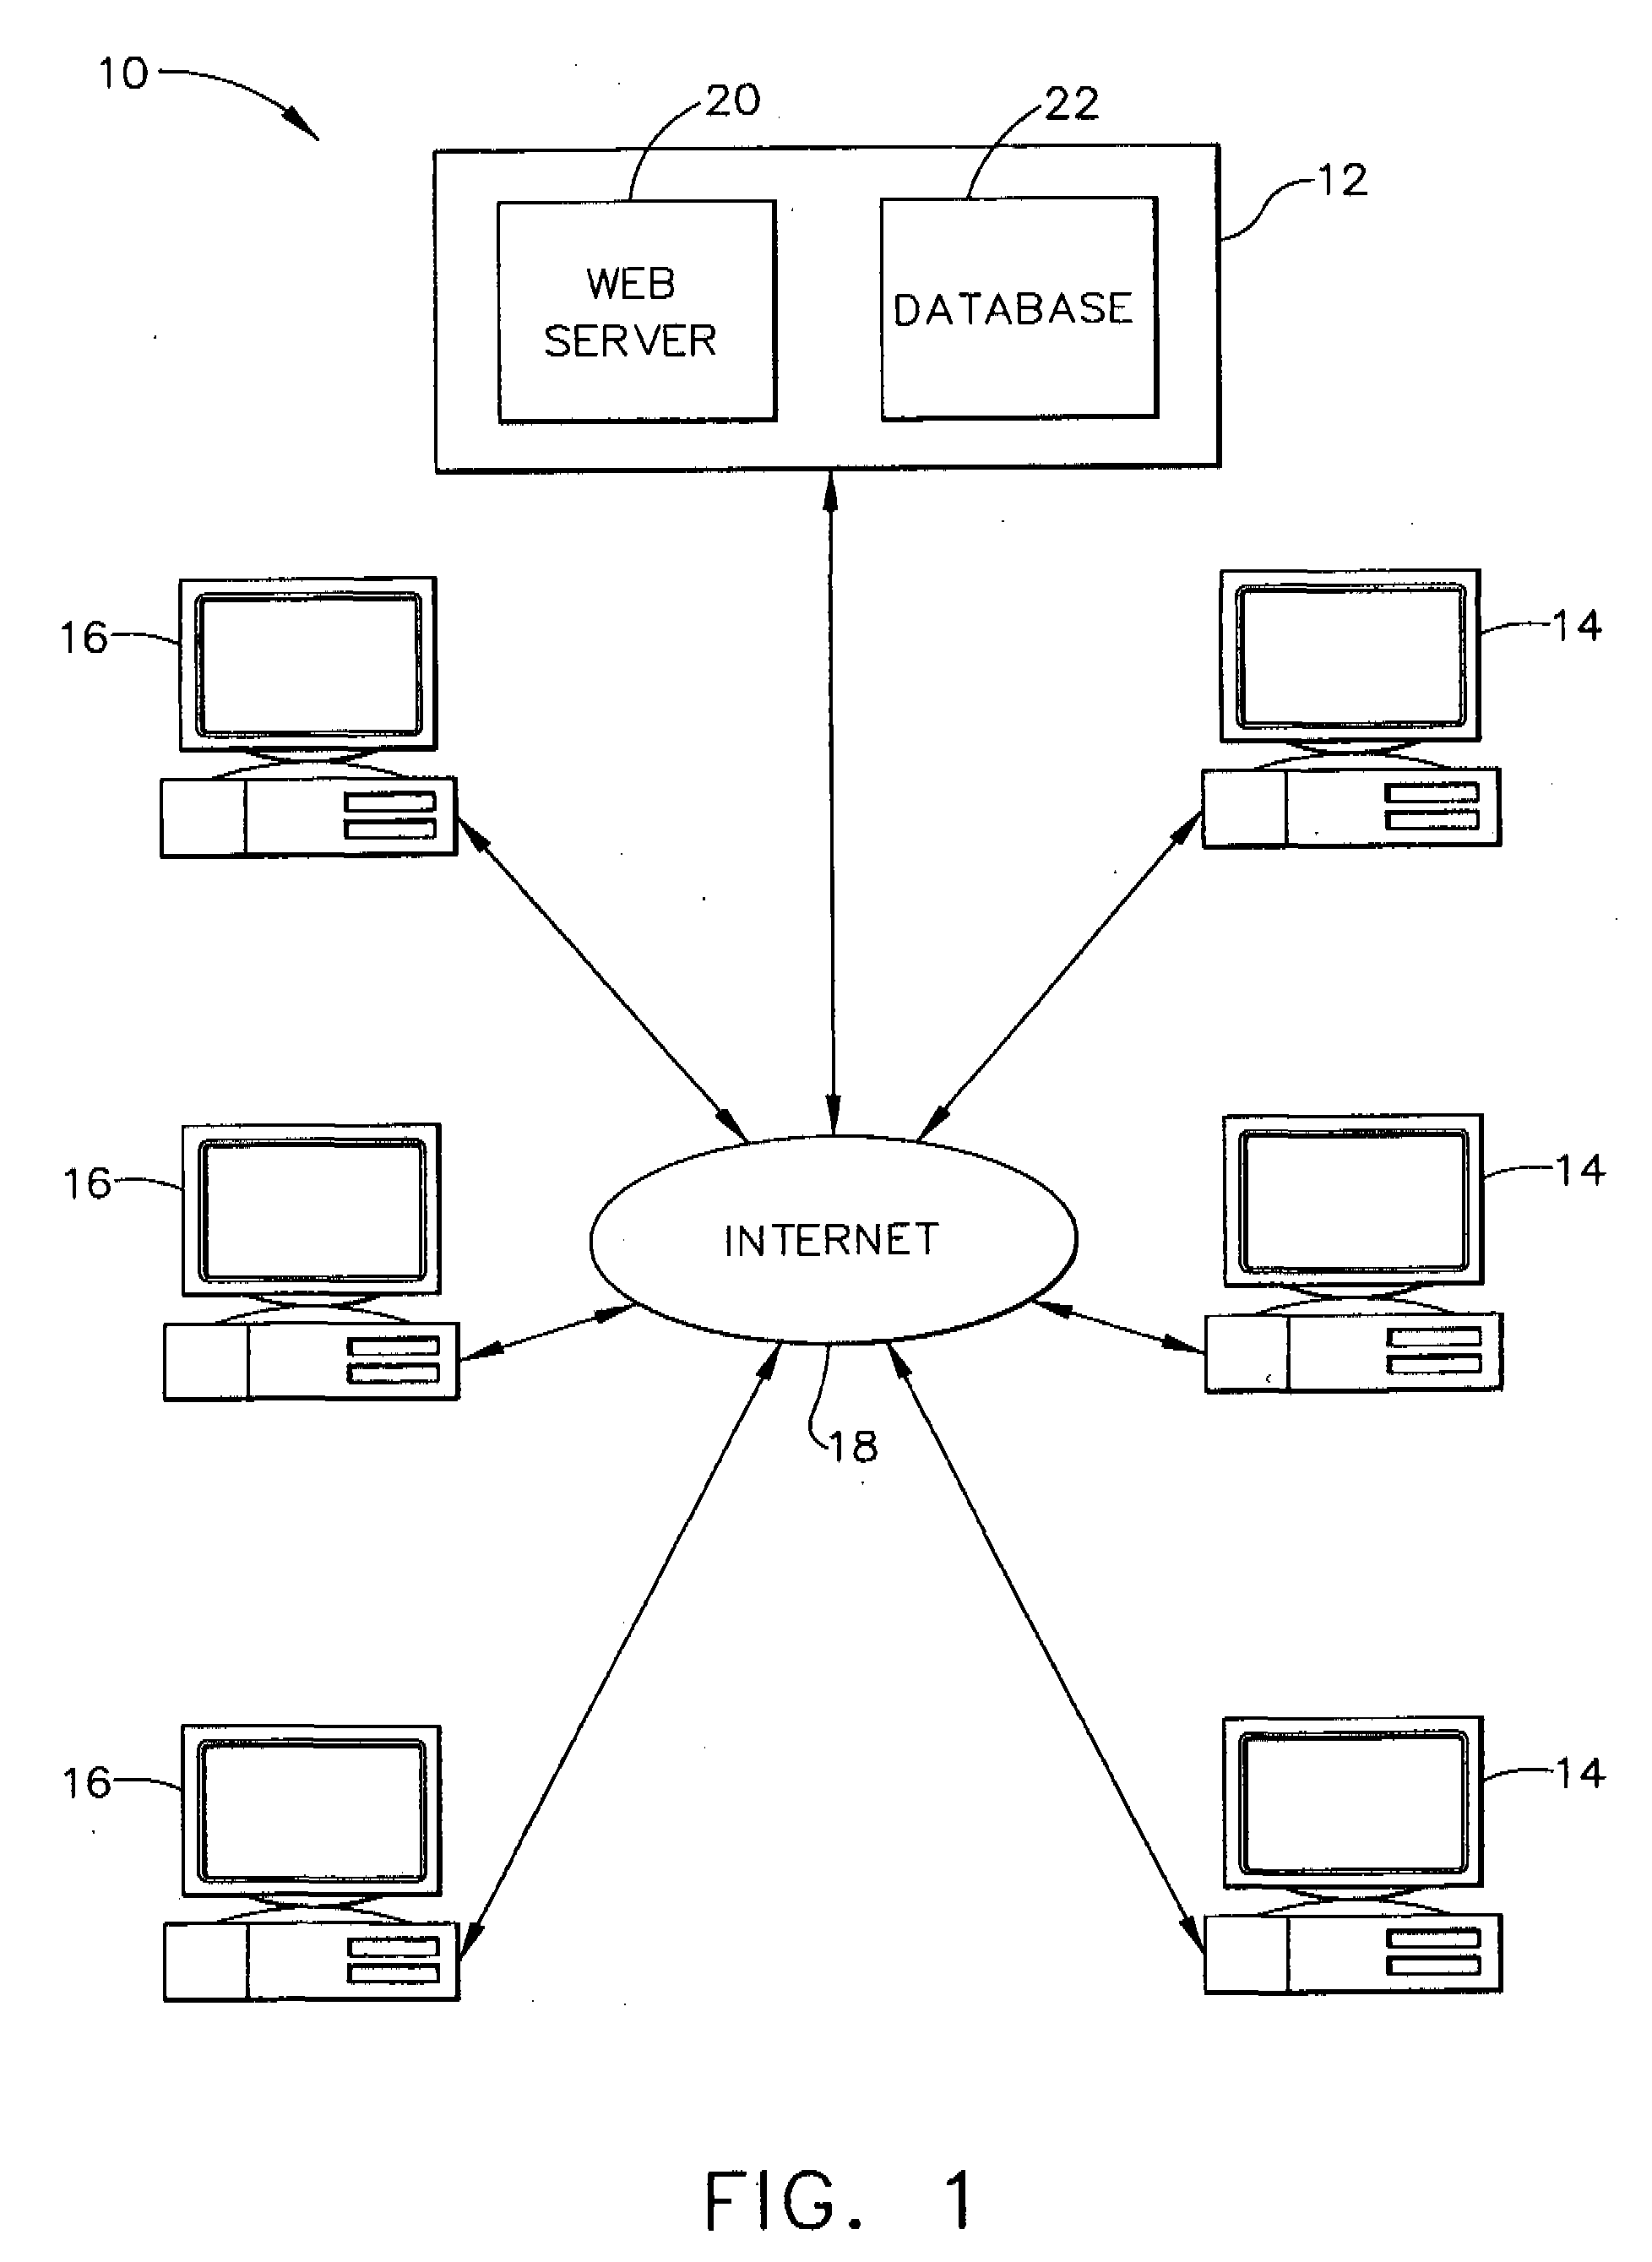 Virtual warehouse parts distribution system and process